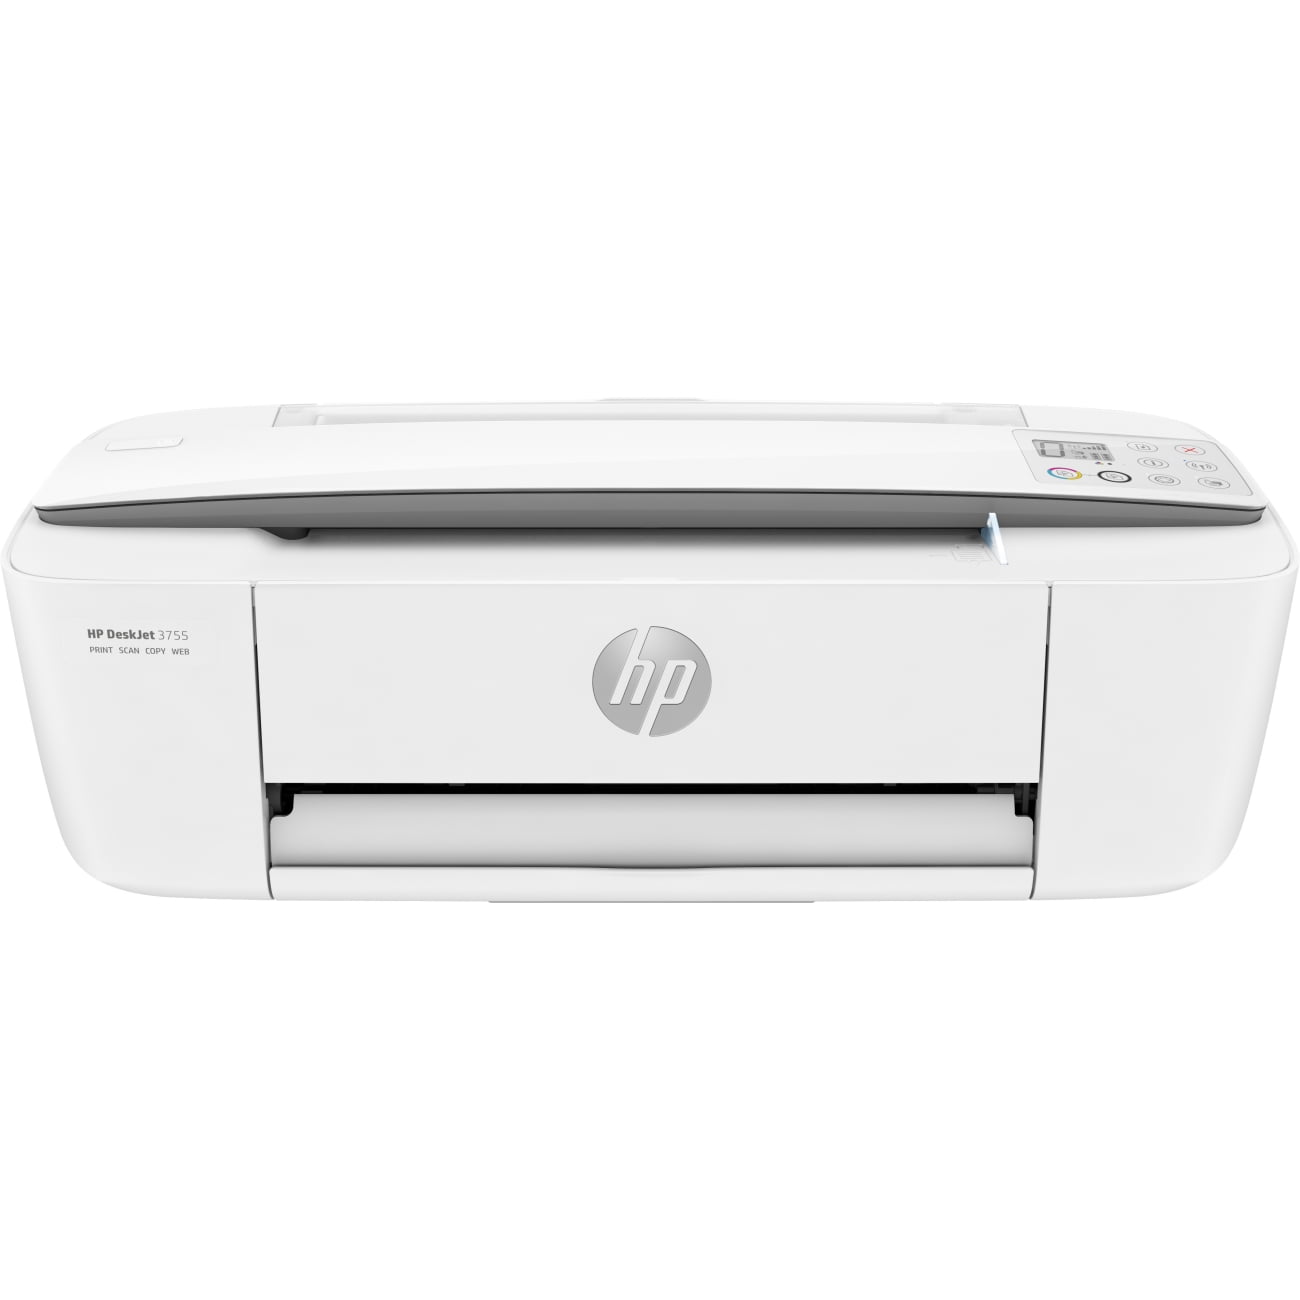 NEW SEALED HP Color LaserJet Pro M183FW Wireless All-in-One Printer!  193905485833